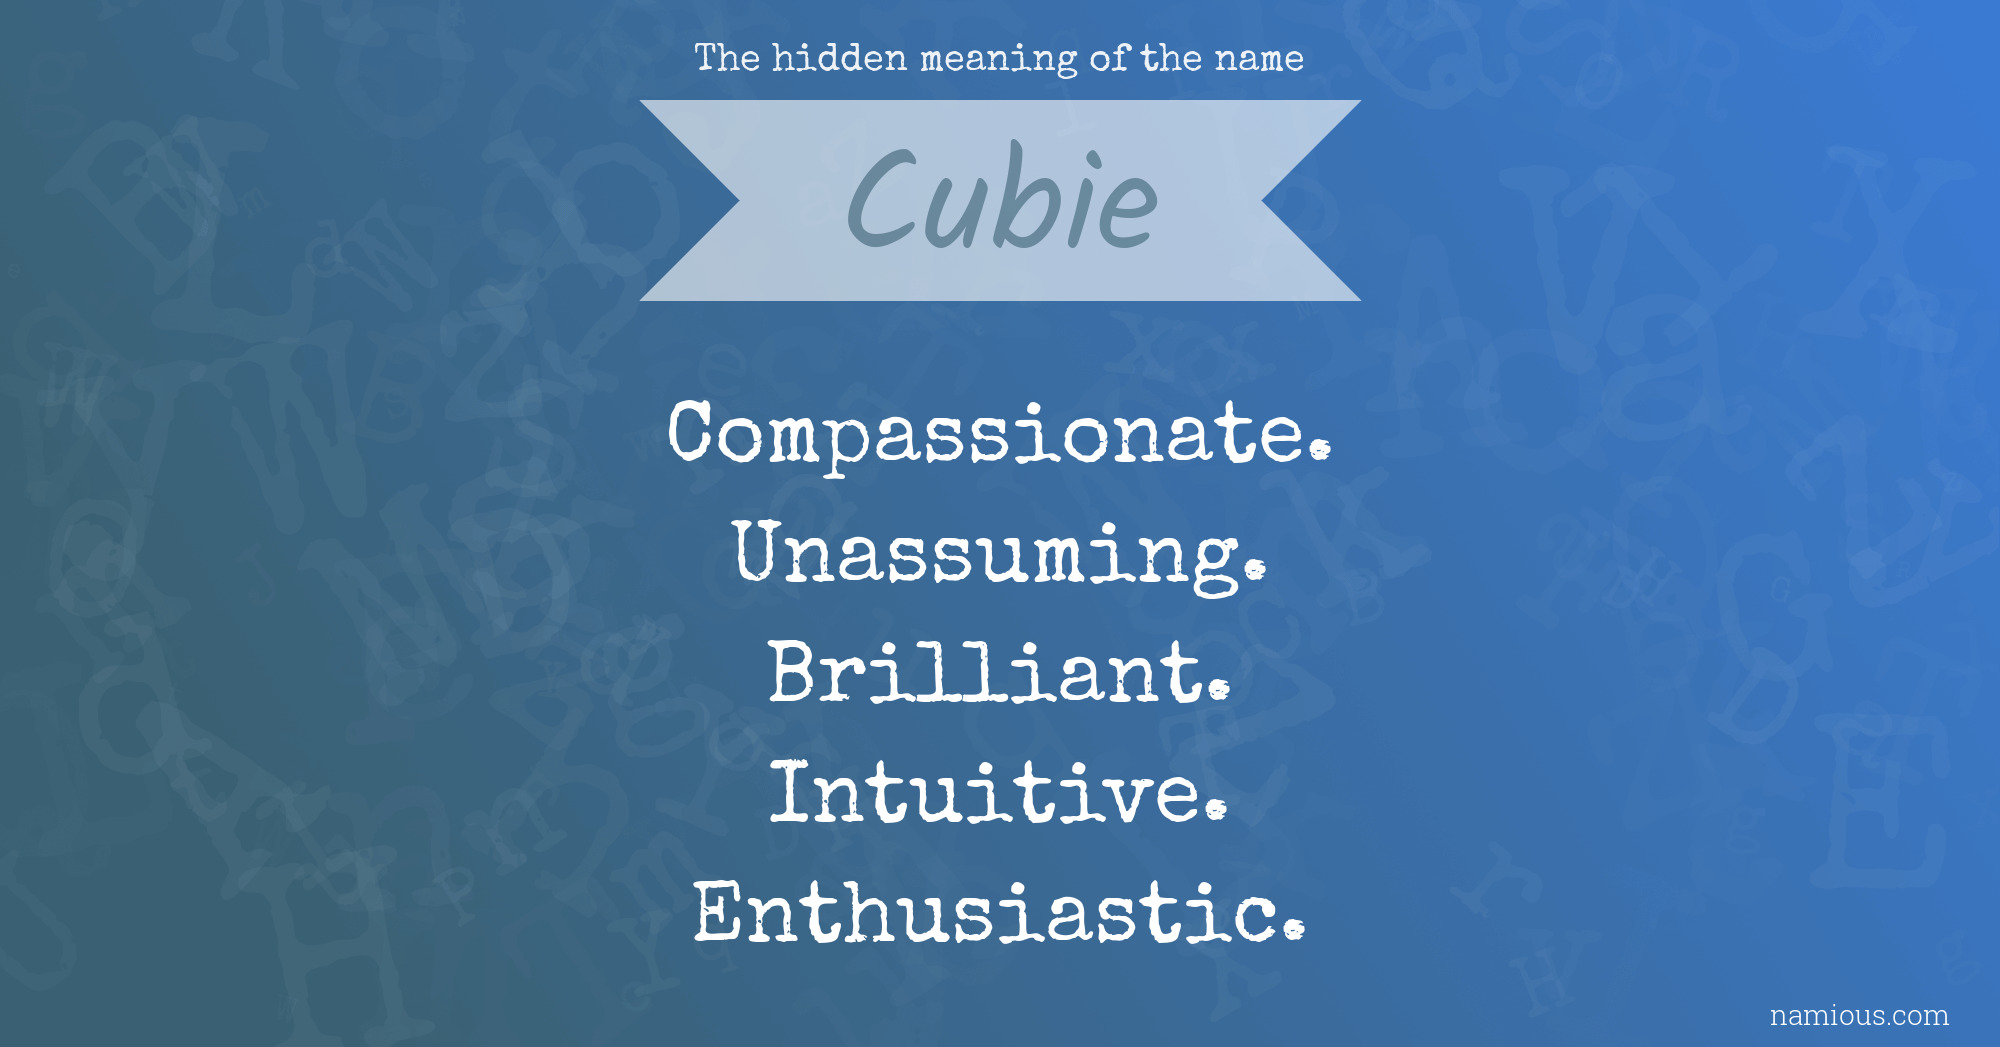 The hidden meaning of the name Cubie